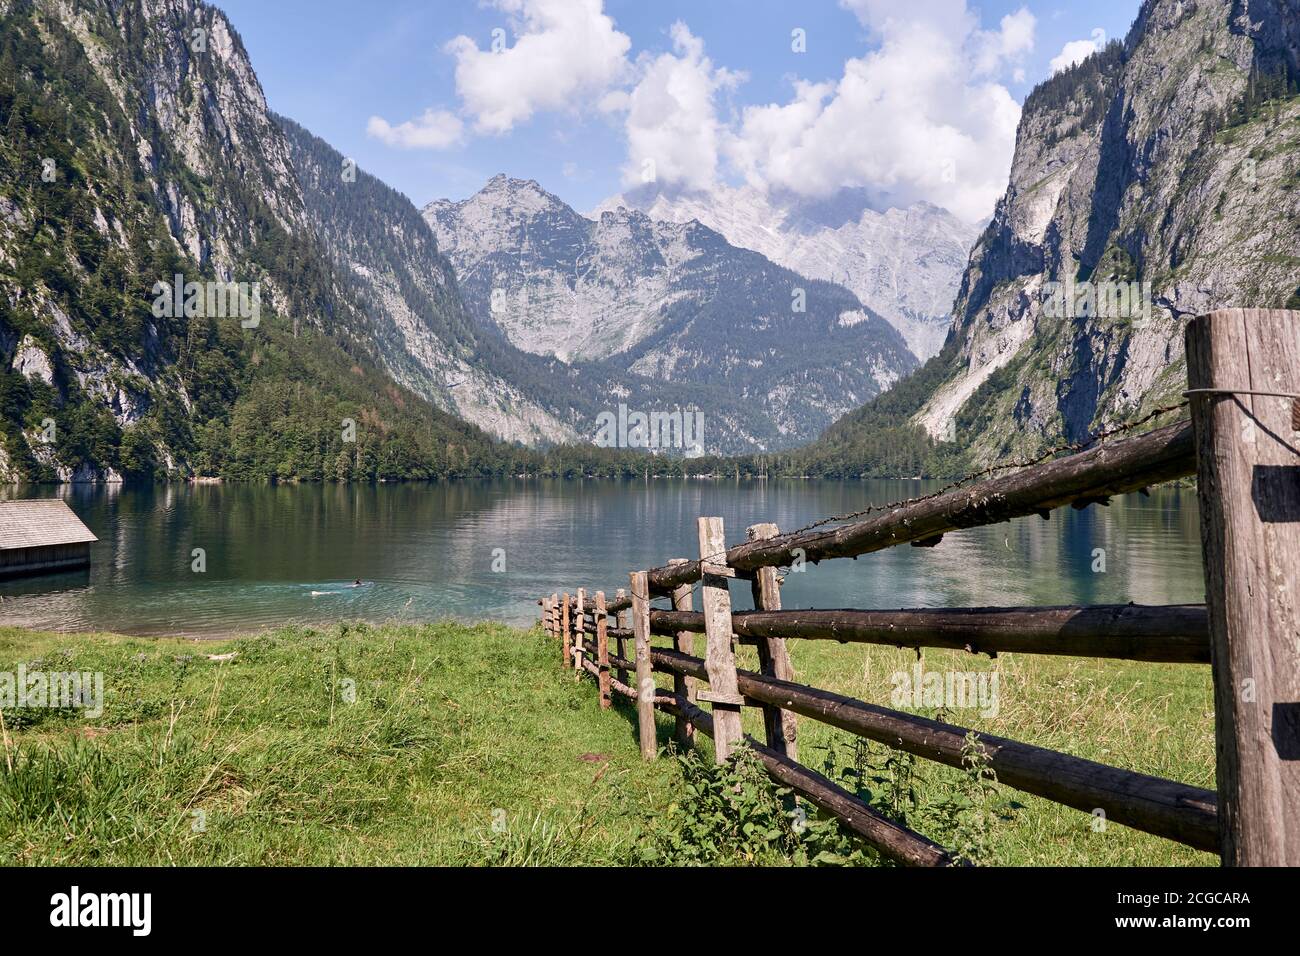 Lake Obersee and scenic mountain landscape on a beautiful summer day in Schoenau, Bavaria, Germany. Stock Photo